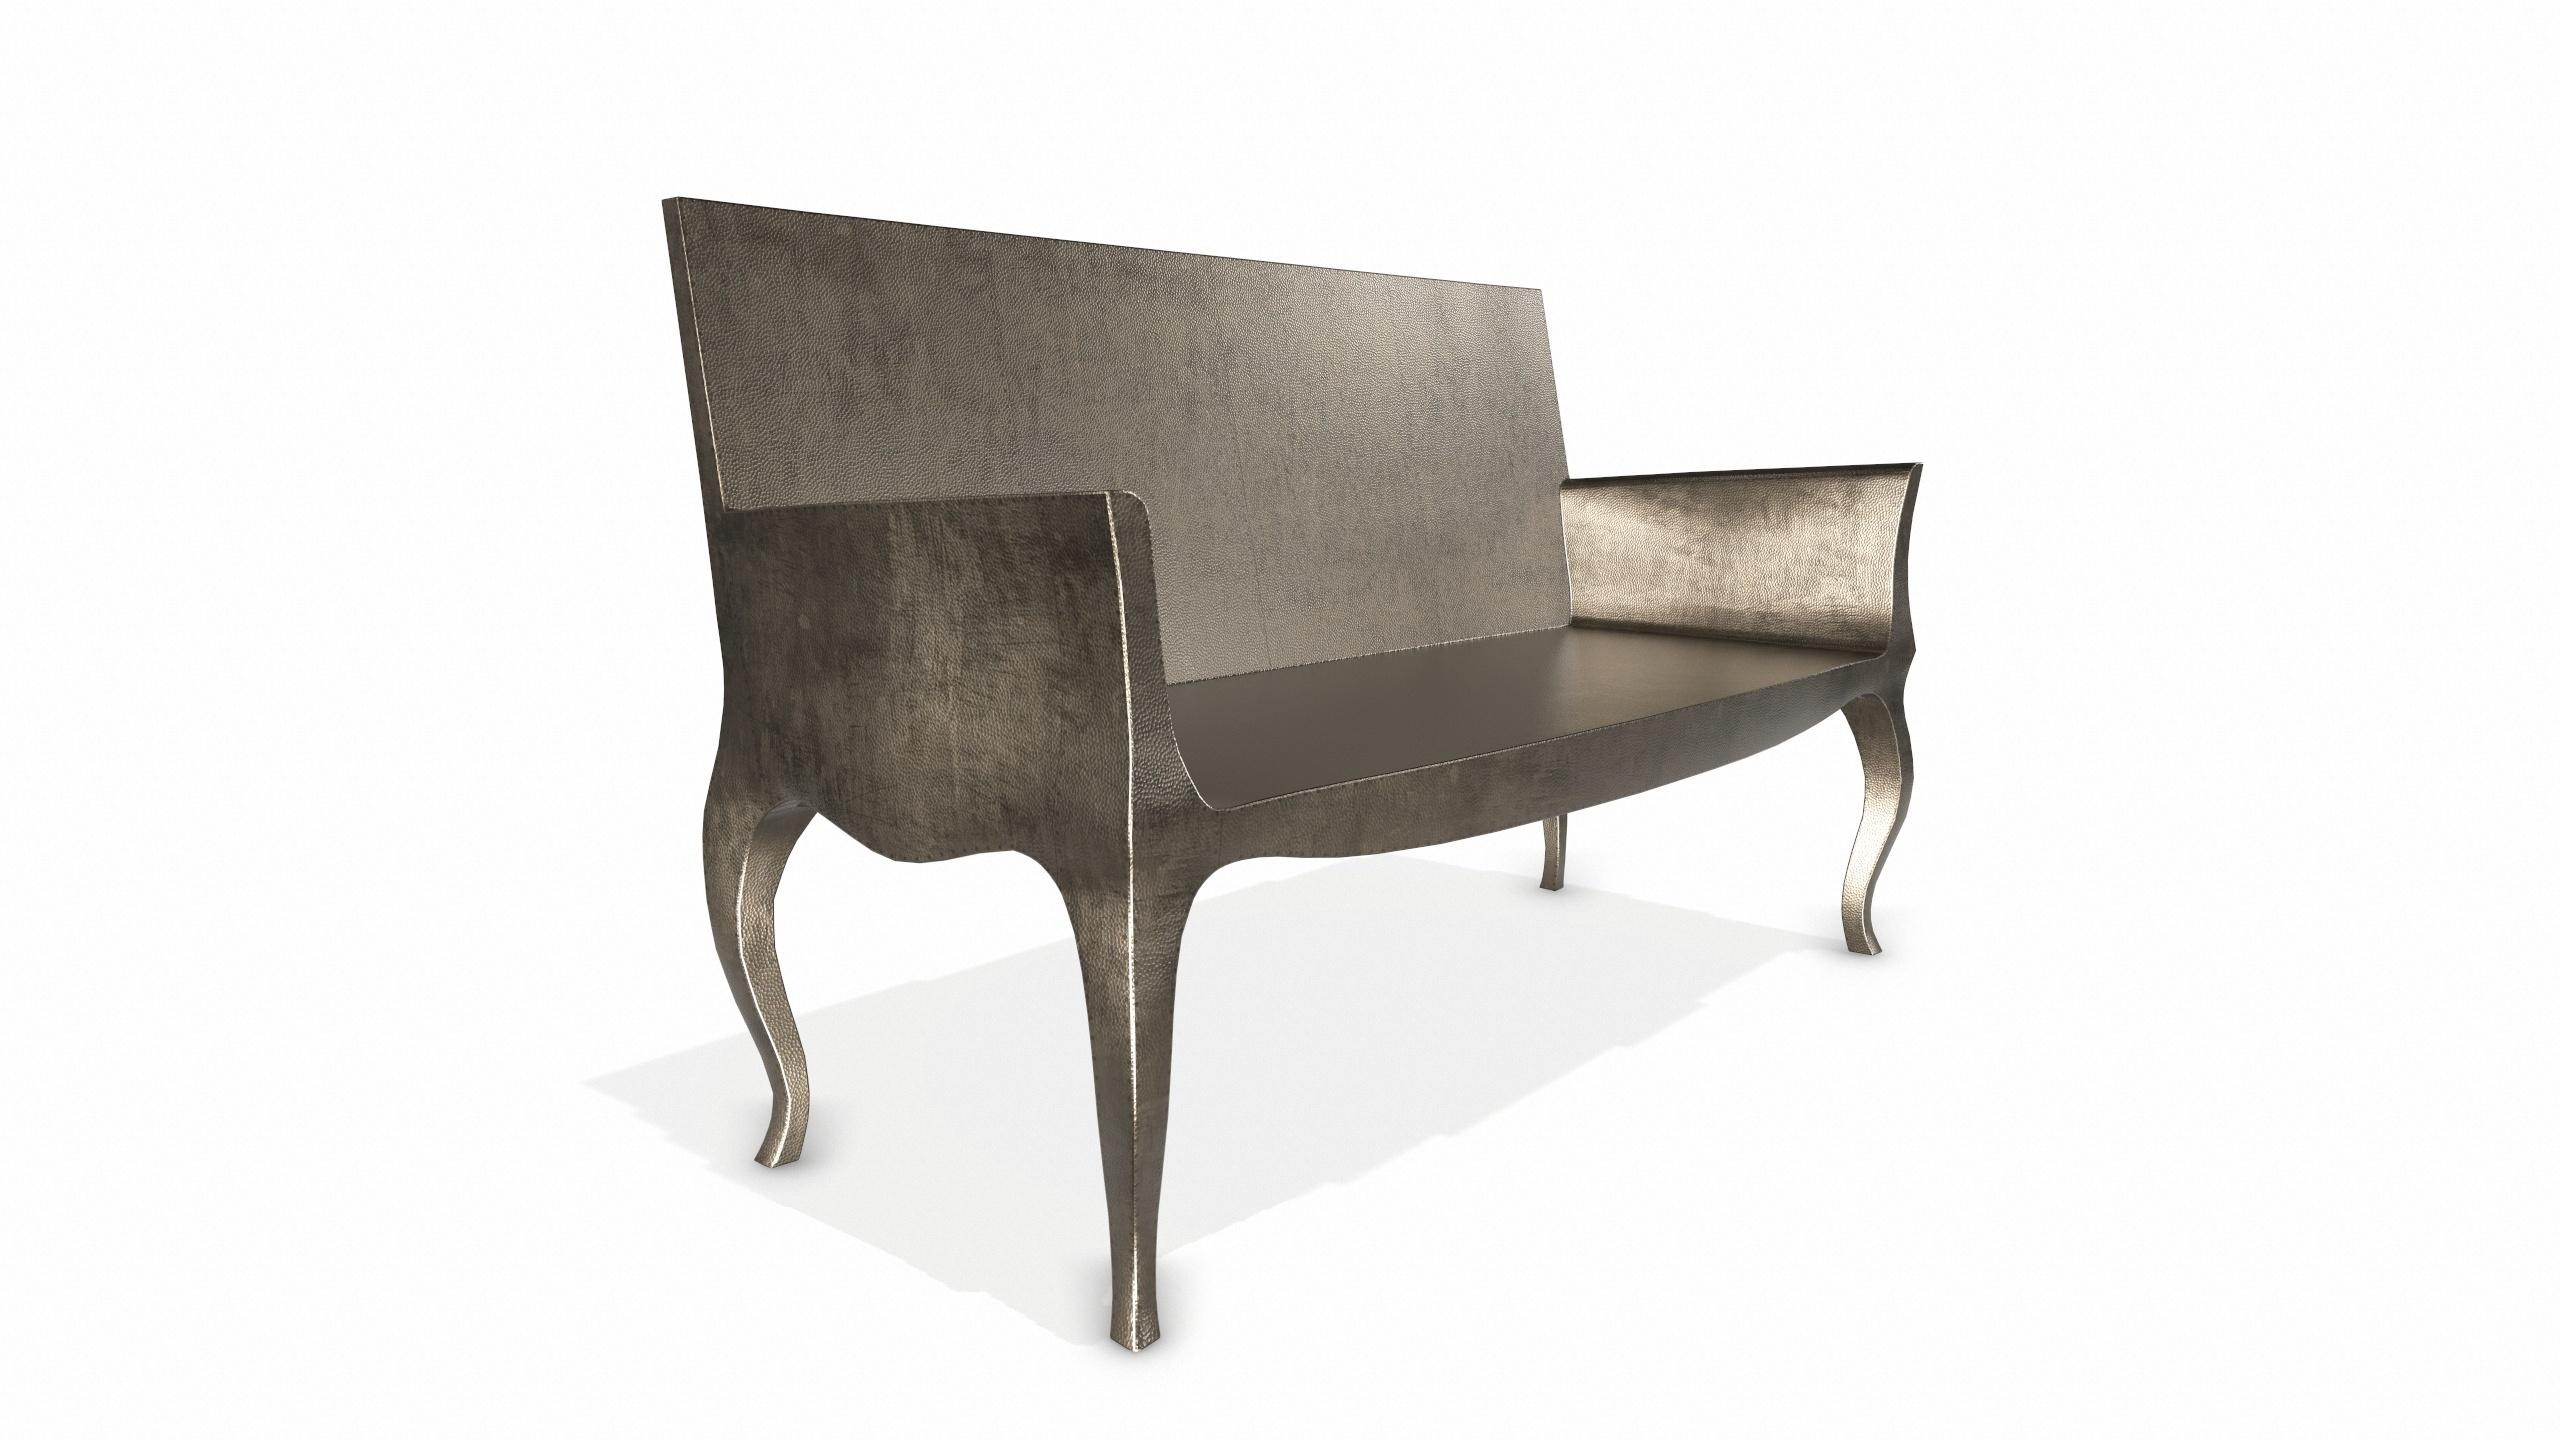 Louise Settee Art Deco Benches in Mid. Hammered Antique Bronze by Paul Mathieu In New Condition For Sale In New York, NY